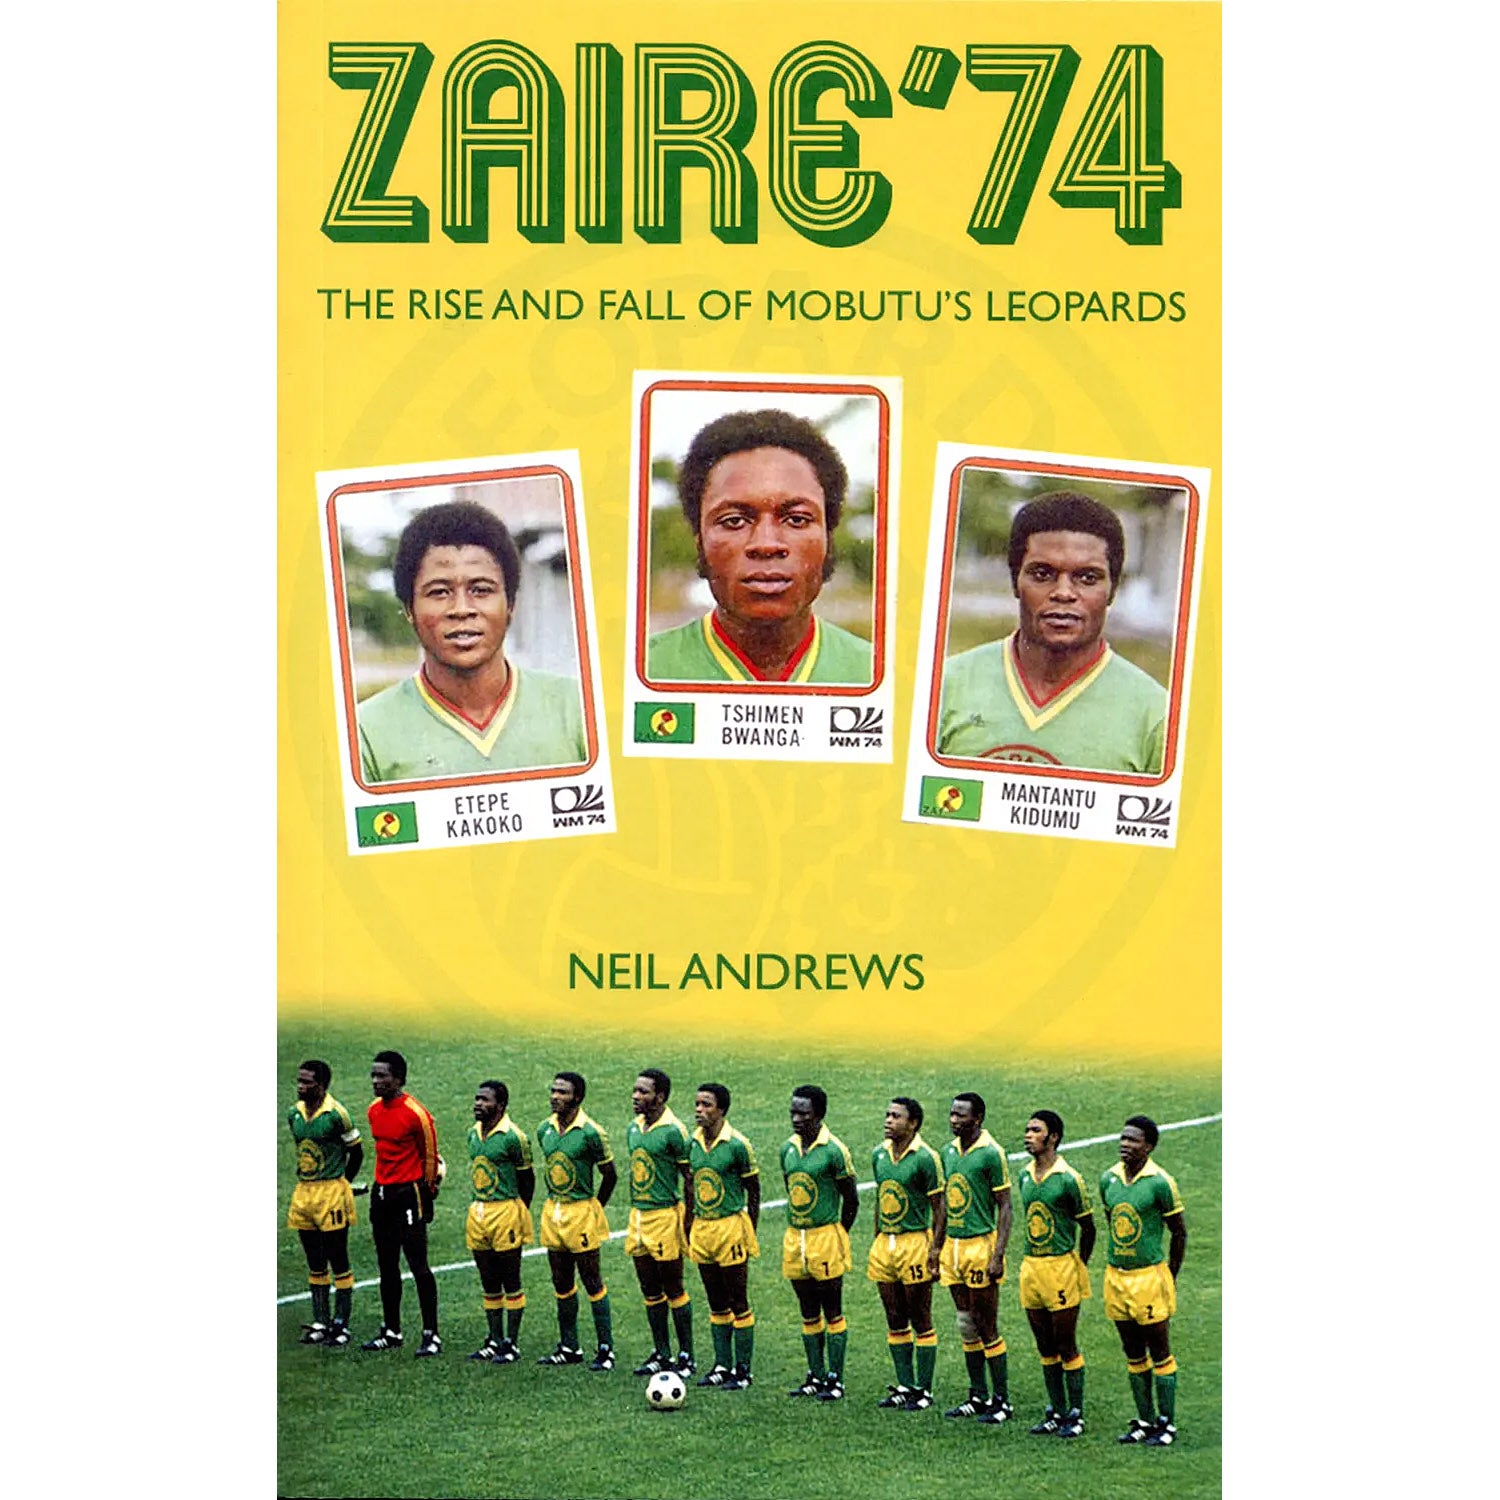 Zaire ’74 – The Rise and Fall of Mobutu's Leopards